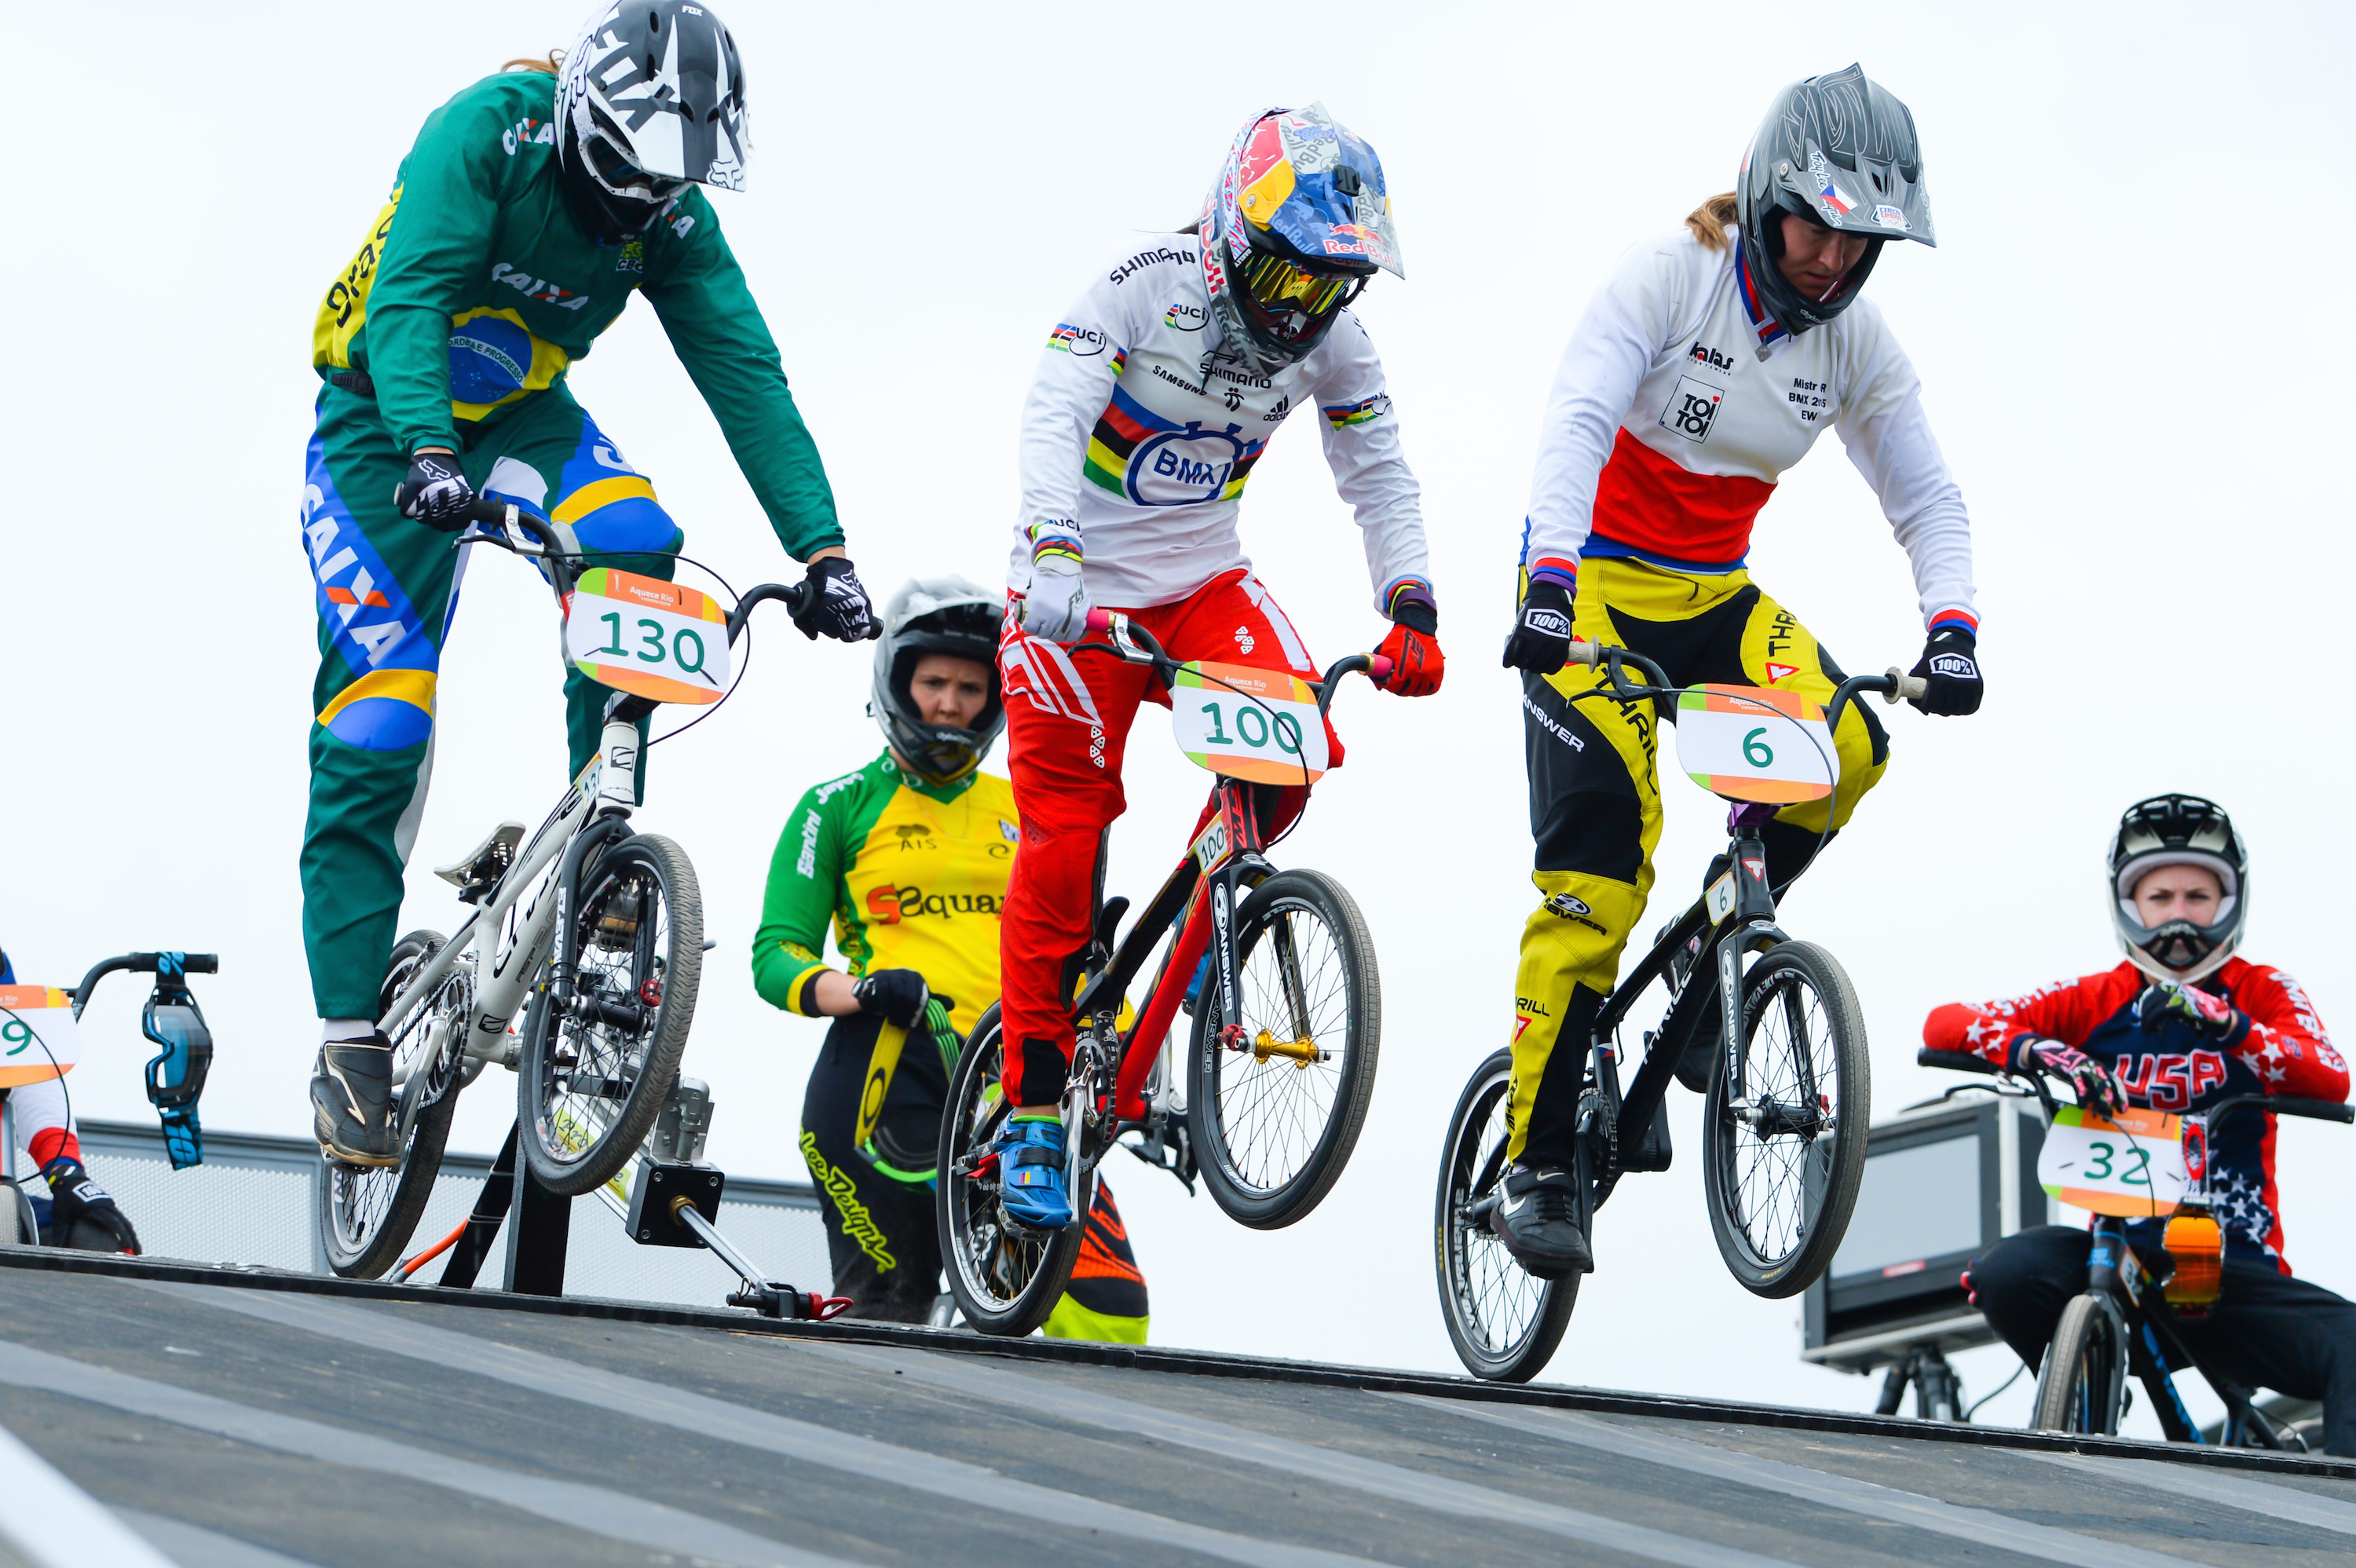 BMX Olympic Test Event in Rio Sees Course Changes and Rain